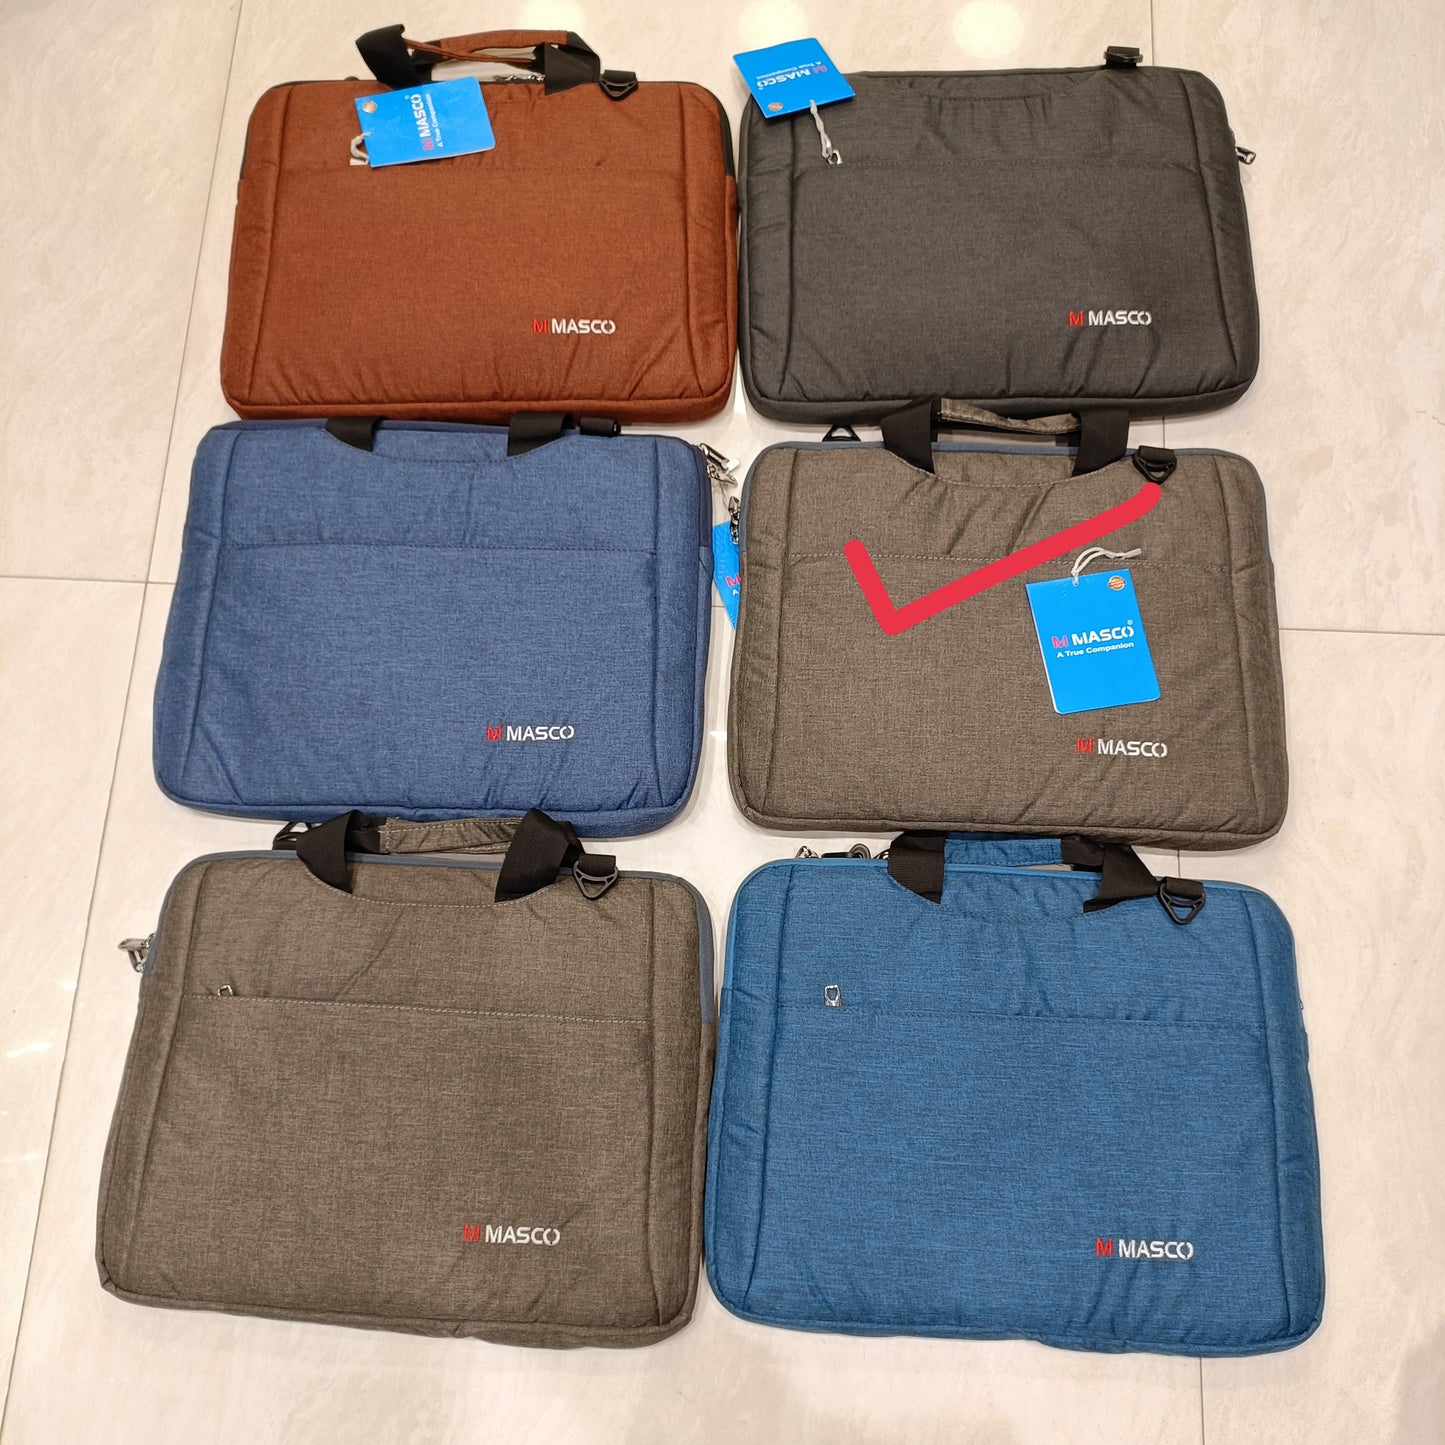 Premium quality laptop sleeve with extra padded cushion for laptop safety